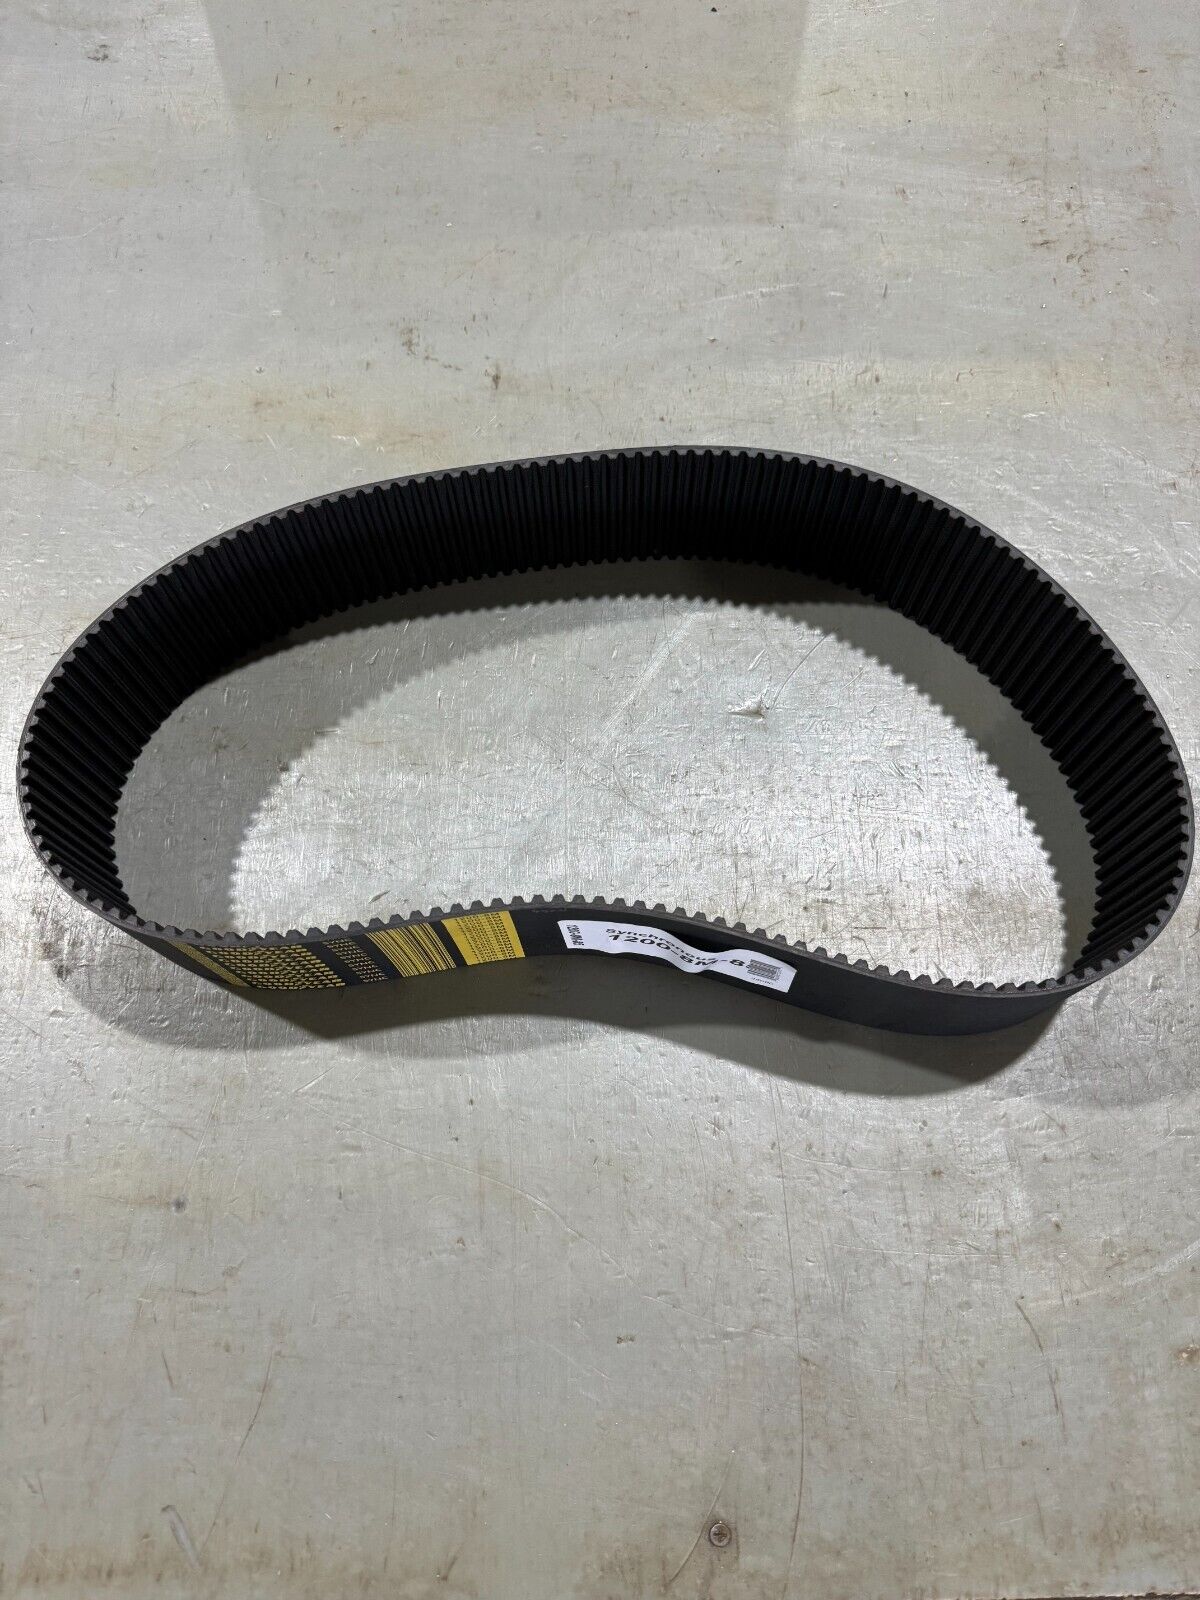 FACTORY NEW GOODYEAR SYNCHRONOUS Sync RPP TIMING BELT 1200-8M-85